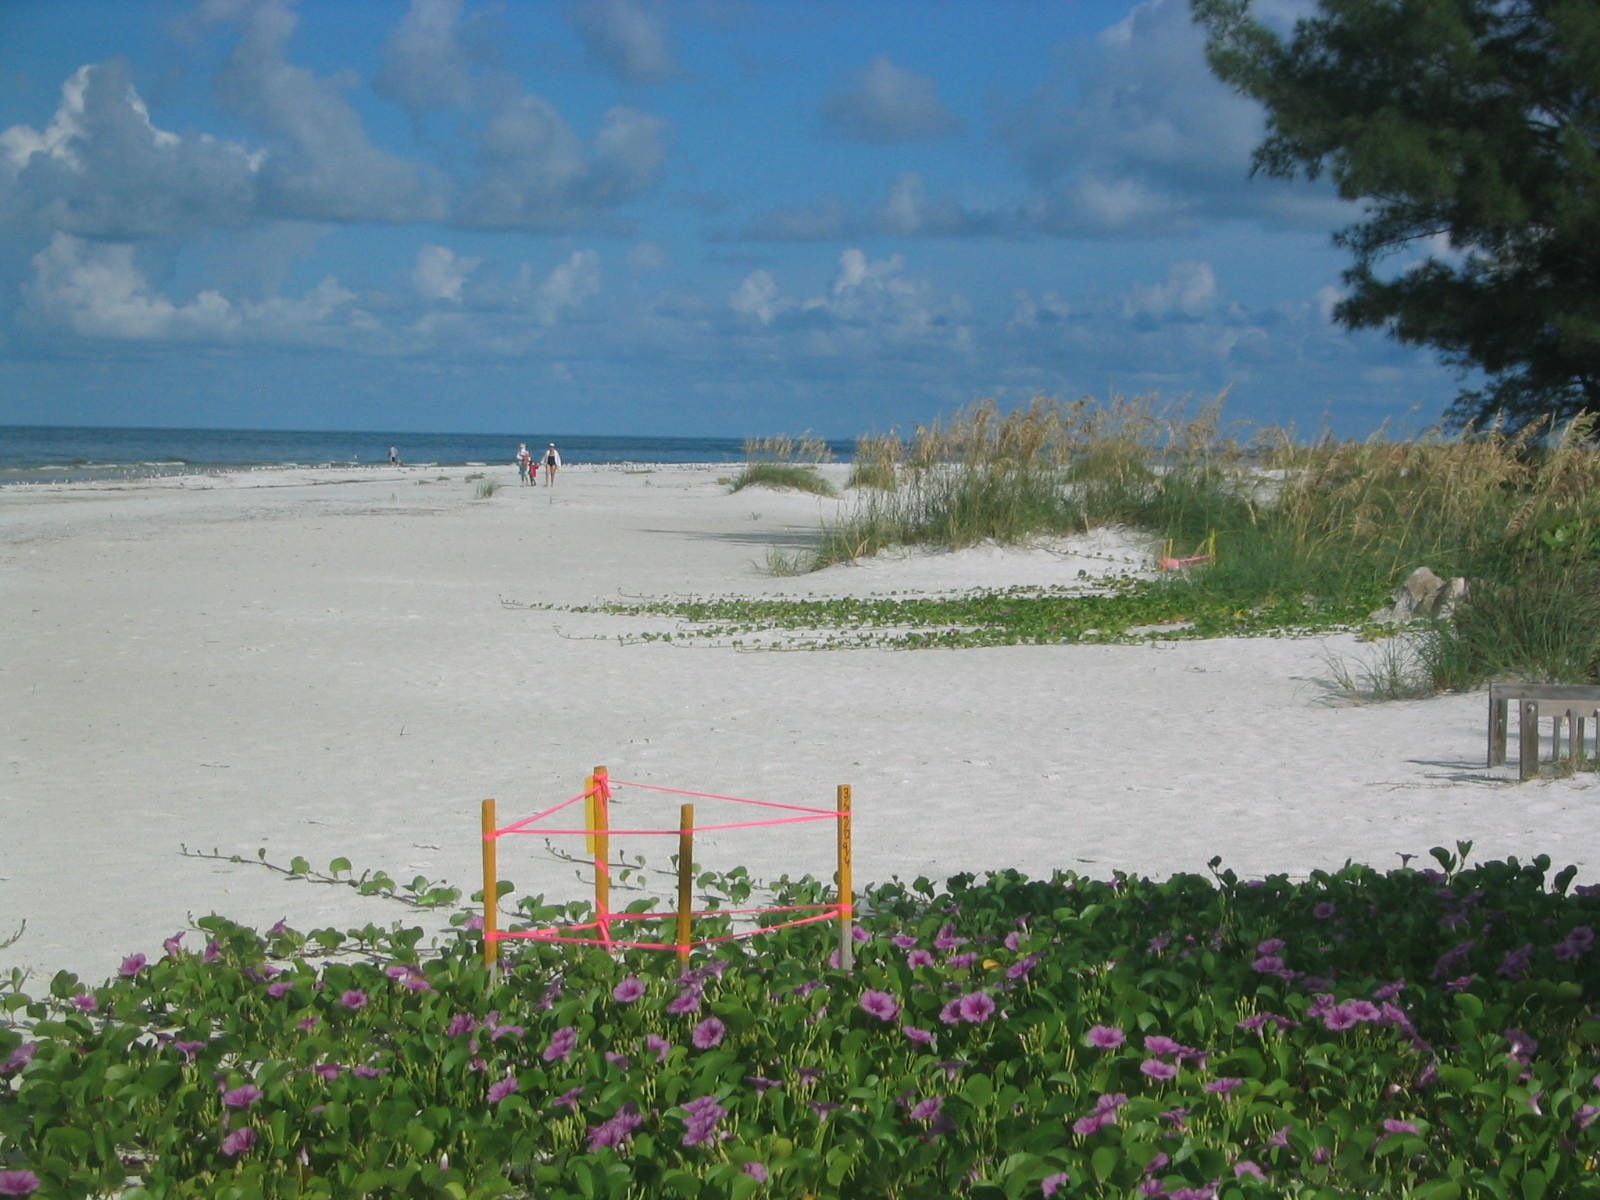 Sea Turtle nest staked for protection and observation by Turtle Watch on Anna Maria Island